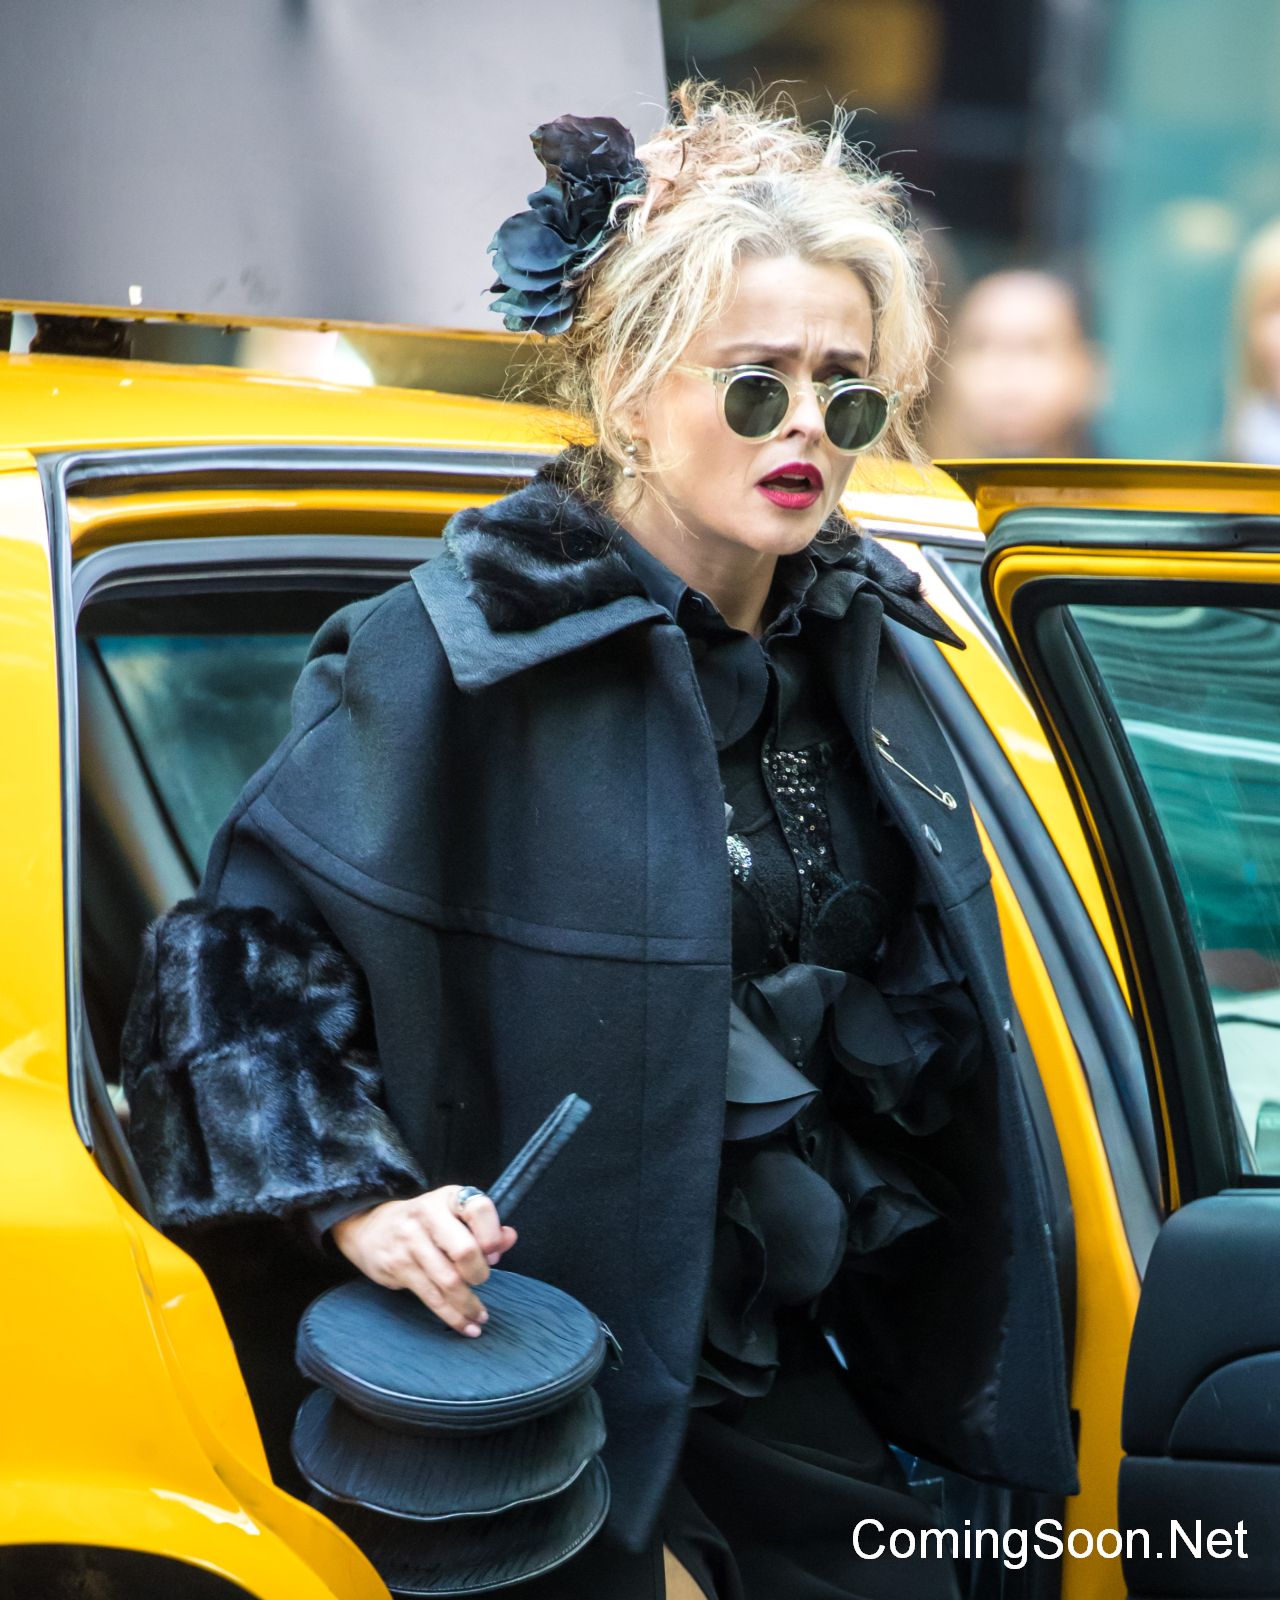 'Ocean's Eight' filming in Midtown New York Featuring: Helena Bonham Carter Where: NY, New York, United States When: 26 Oct 2016 Credit: WENN.com